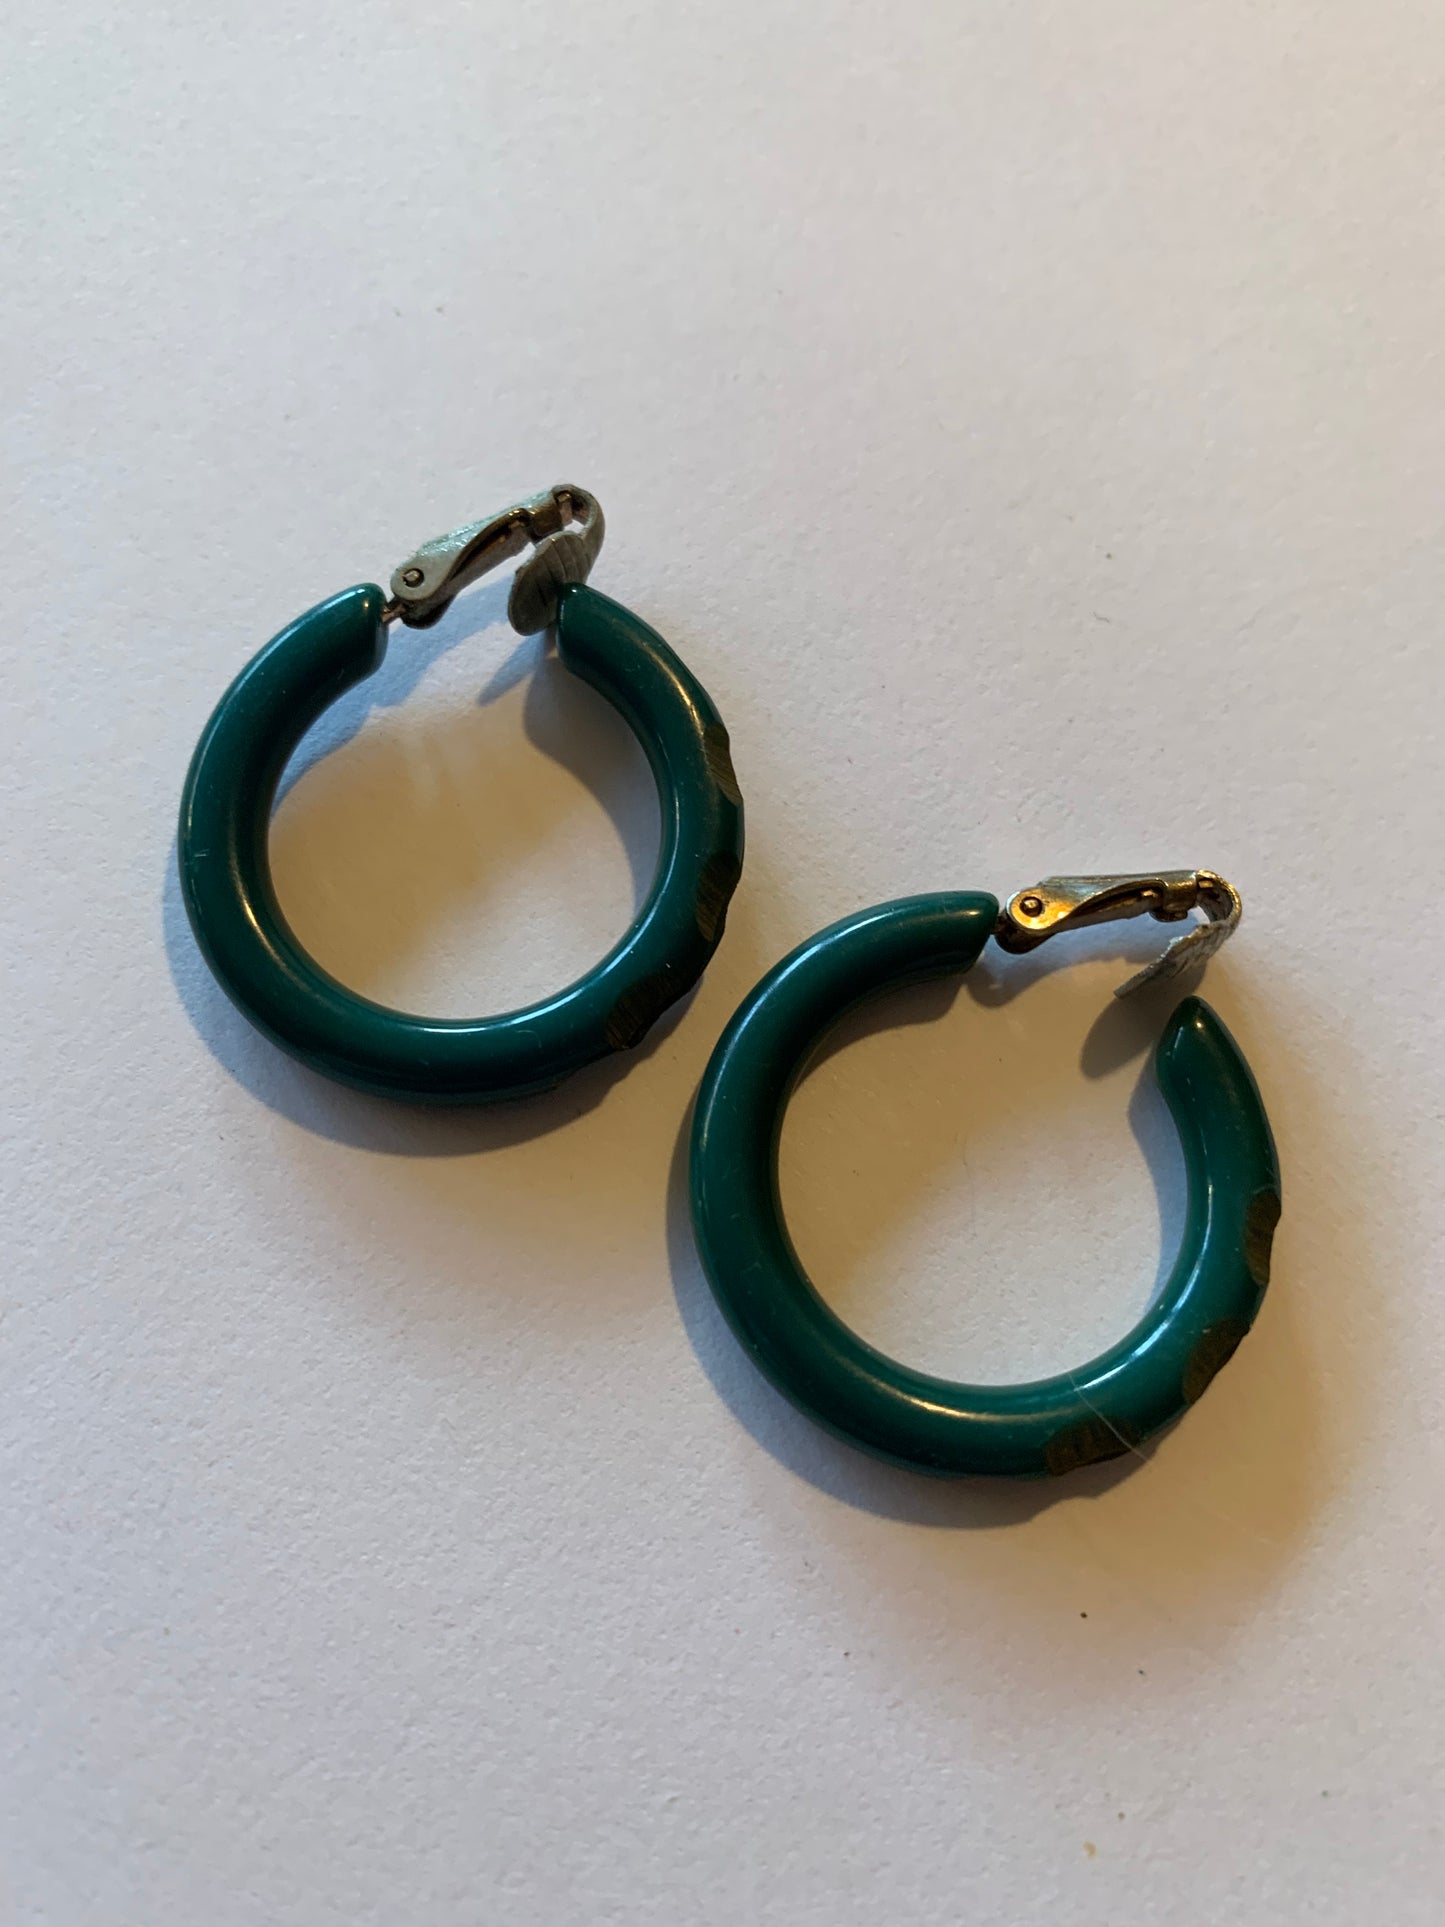 Pine Green Notched Celluloid Clip Hoop Earrings circa 1930s